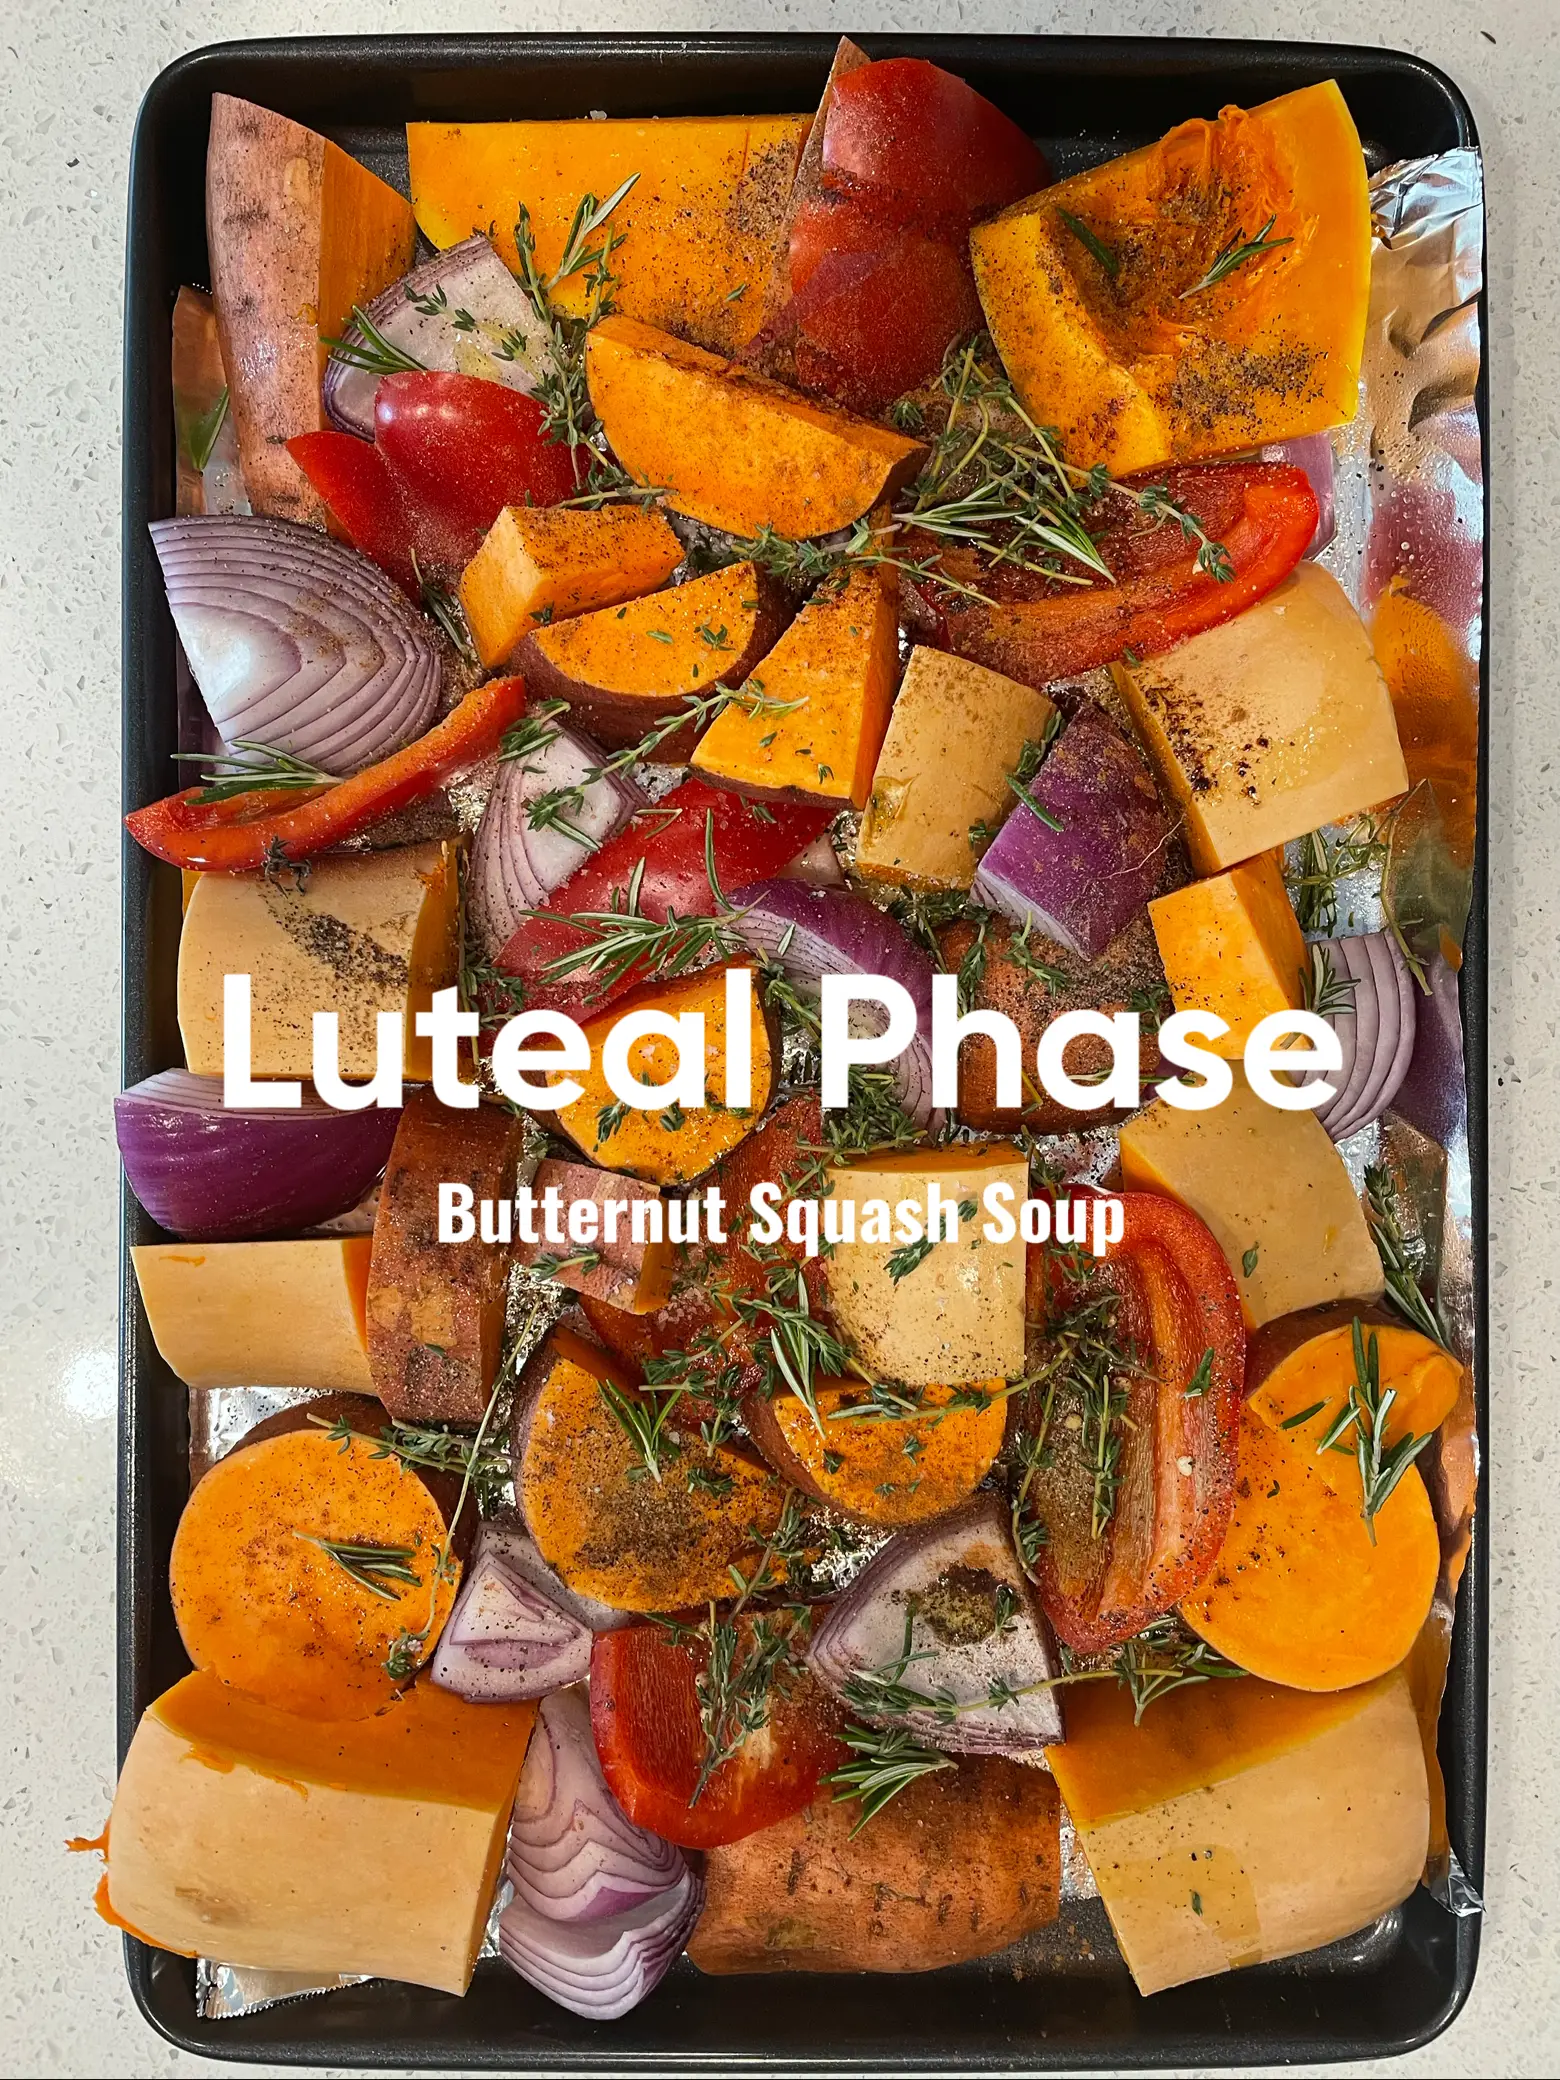 Plant Based Luteal Phase Meal 🌱✨, Gallery posted by bitesofbalance